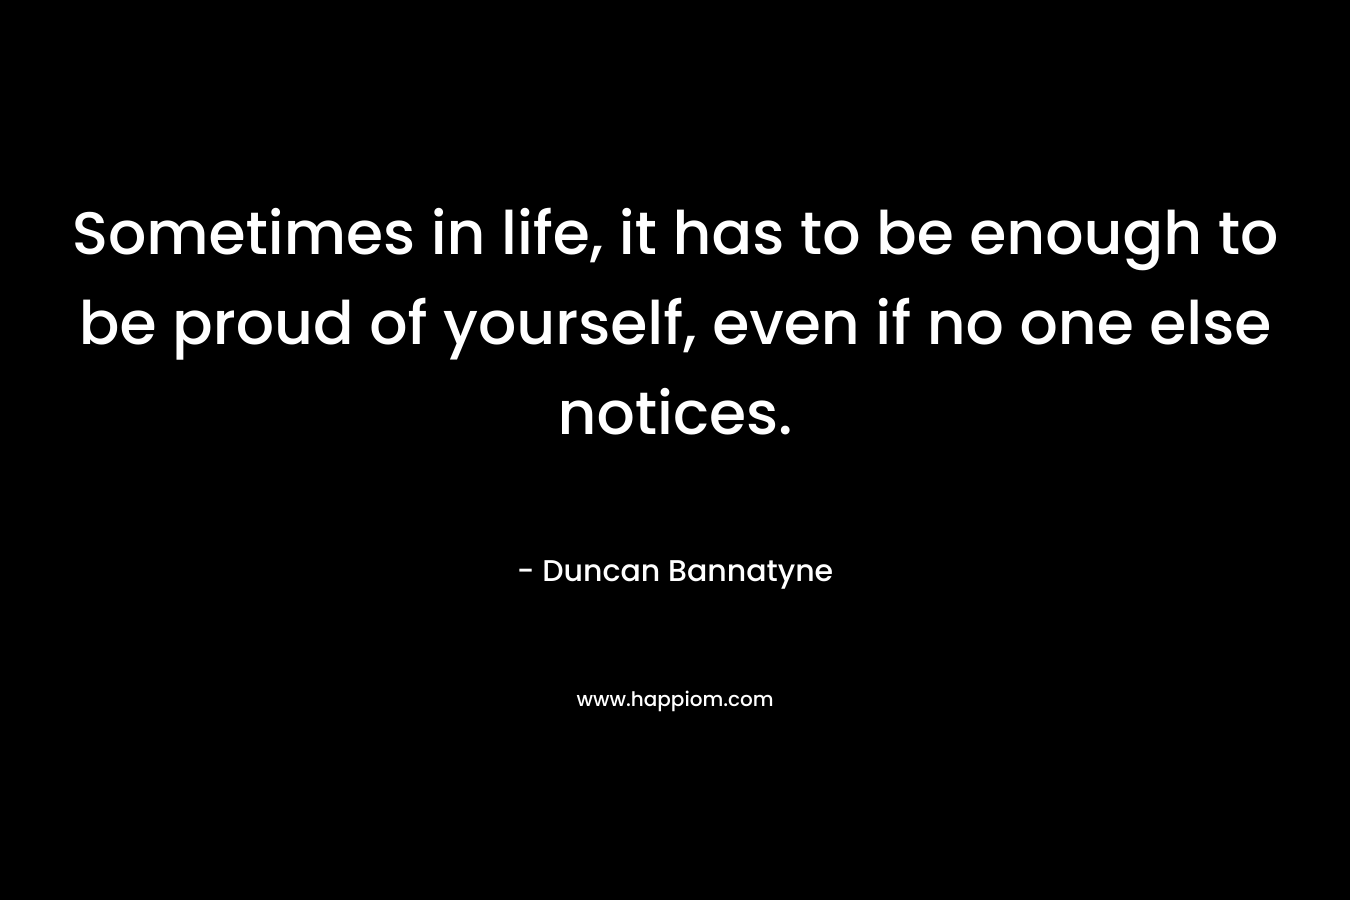 Sometimes in life, it has to be enough to be proud of yourself, even if no one else notices. – Duncan Bannatyne